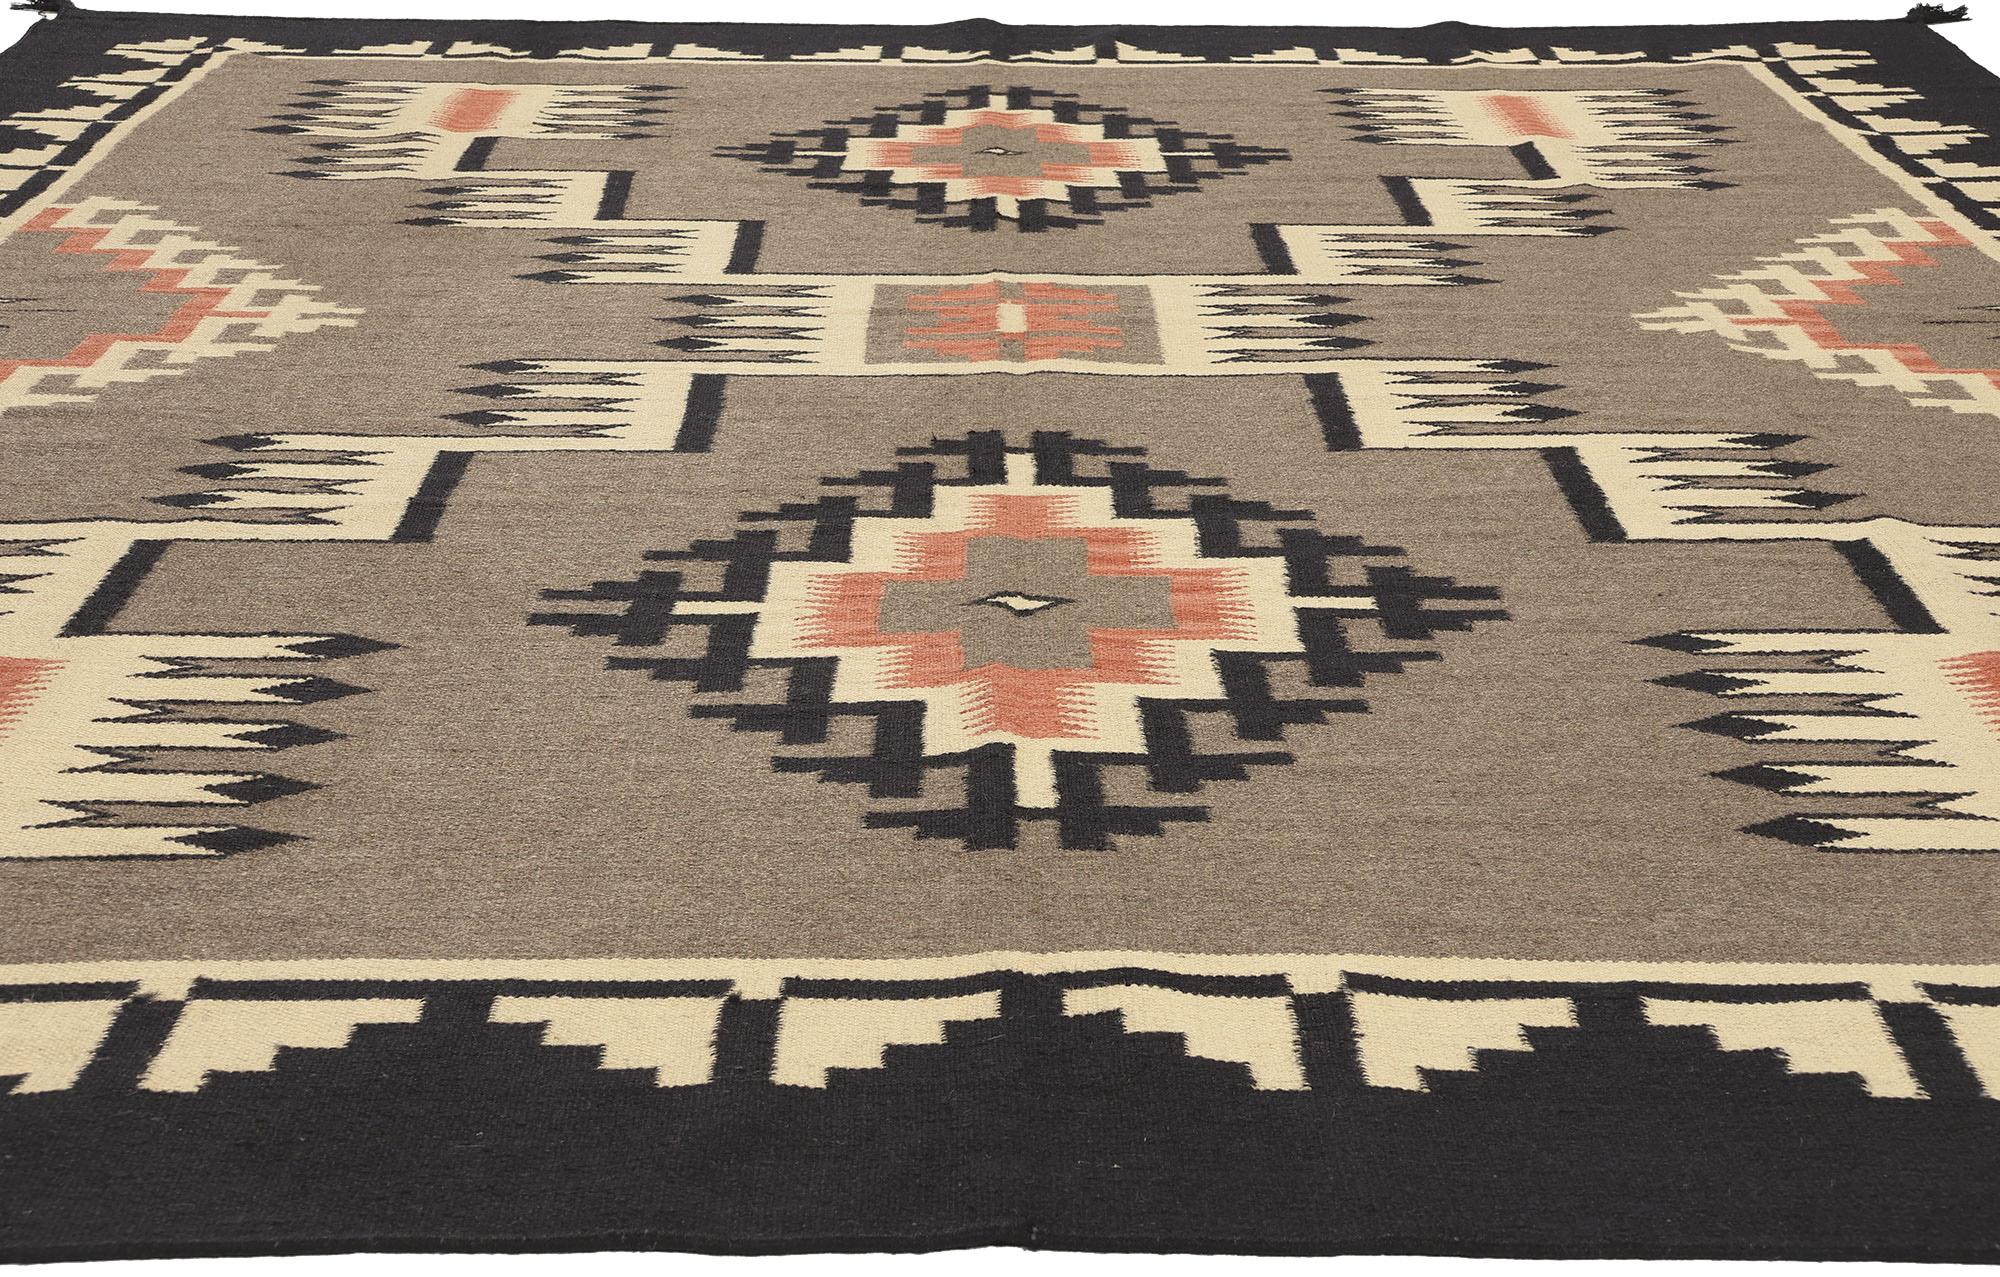 South Asian Contemporary Santa Fe Southwest Modern Navajo-Style Rug with Storm Pattern For Sale